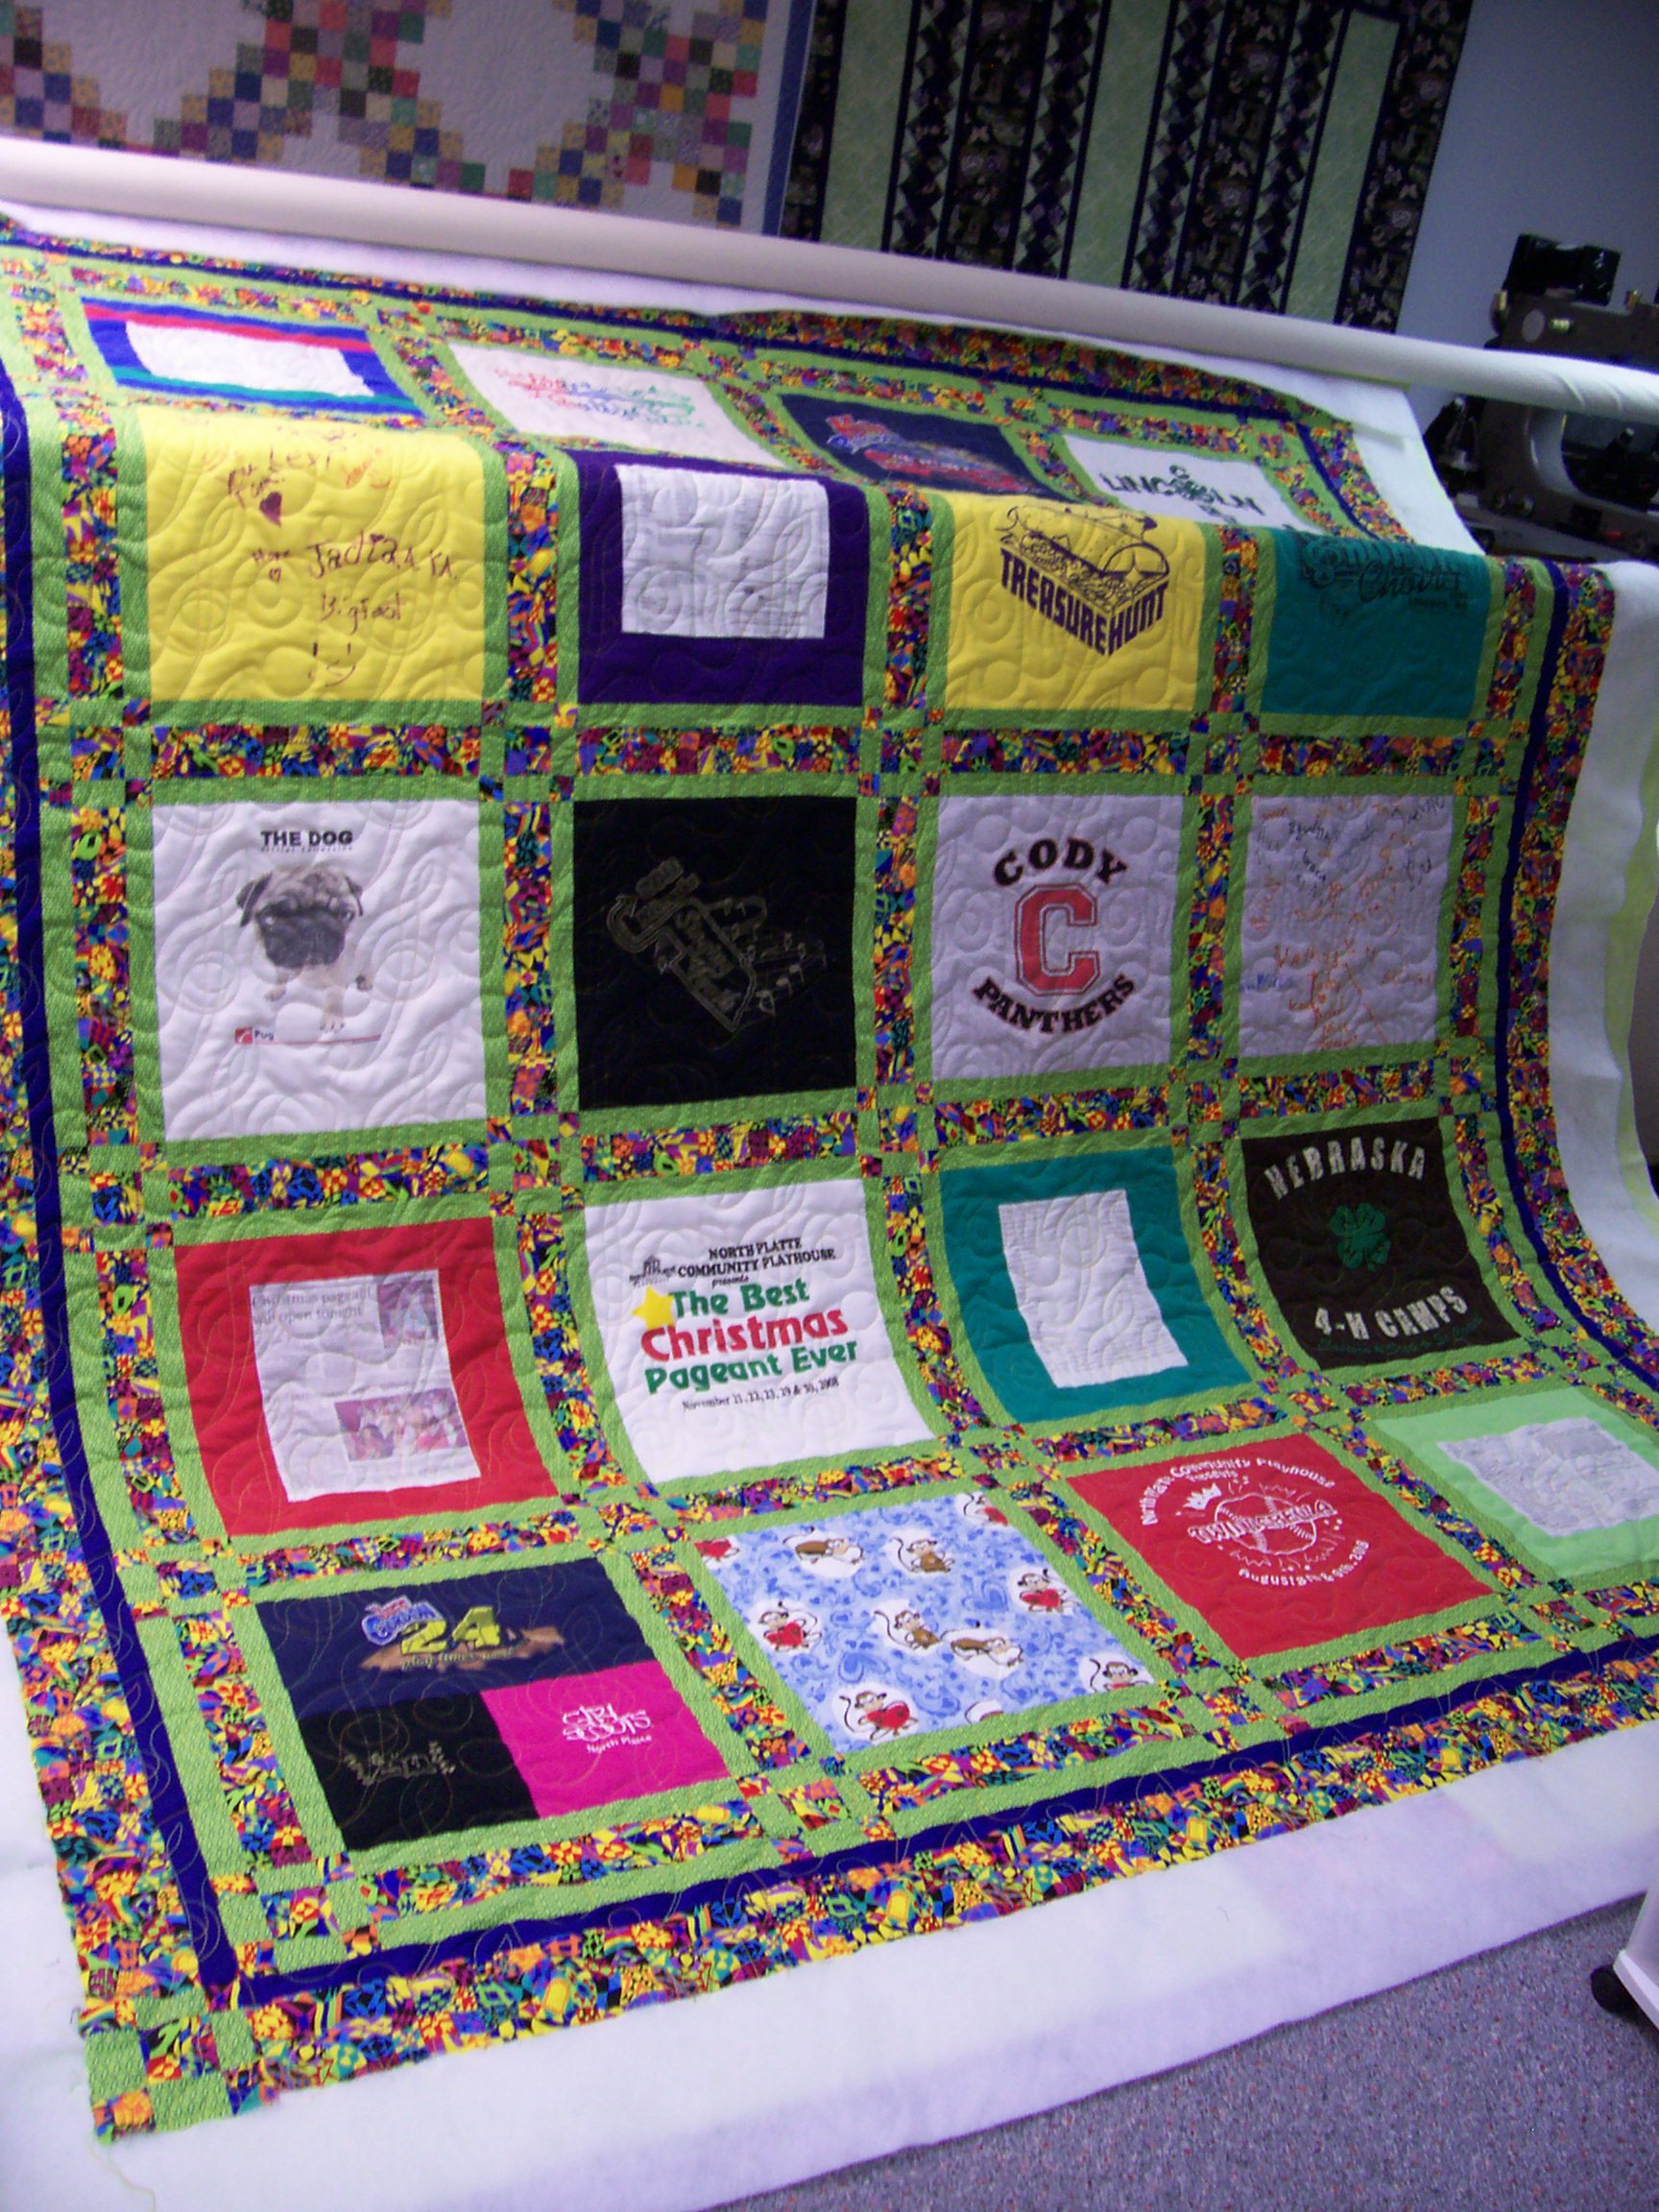 T Shirt quilt made by Sandy - Quiltingboard Forums